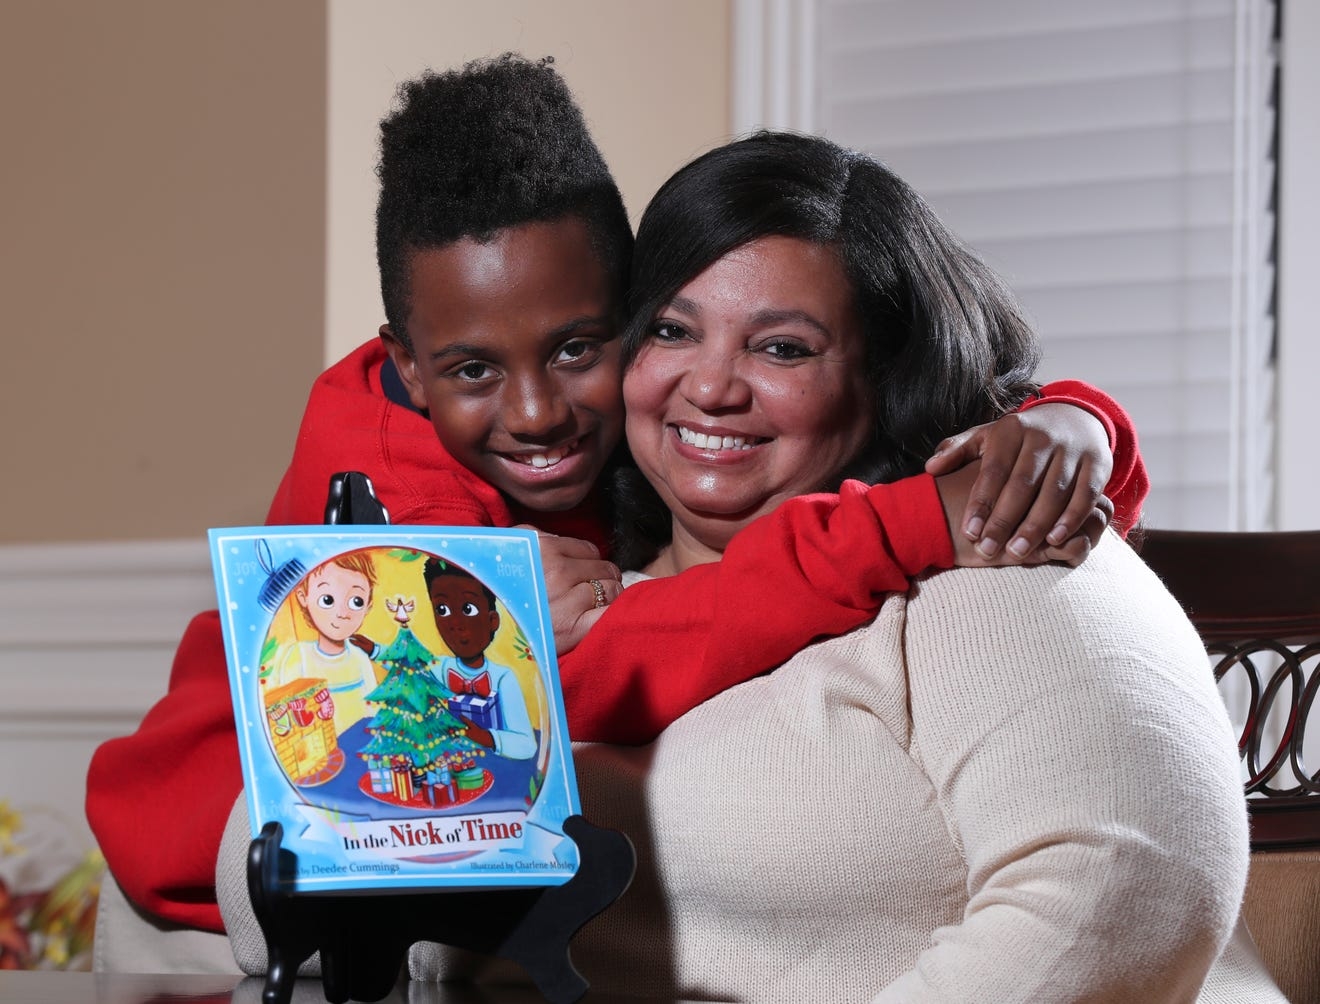 A mom couldn’t find a Christmas story about a brown boy. So she wrote her own